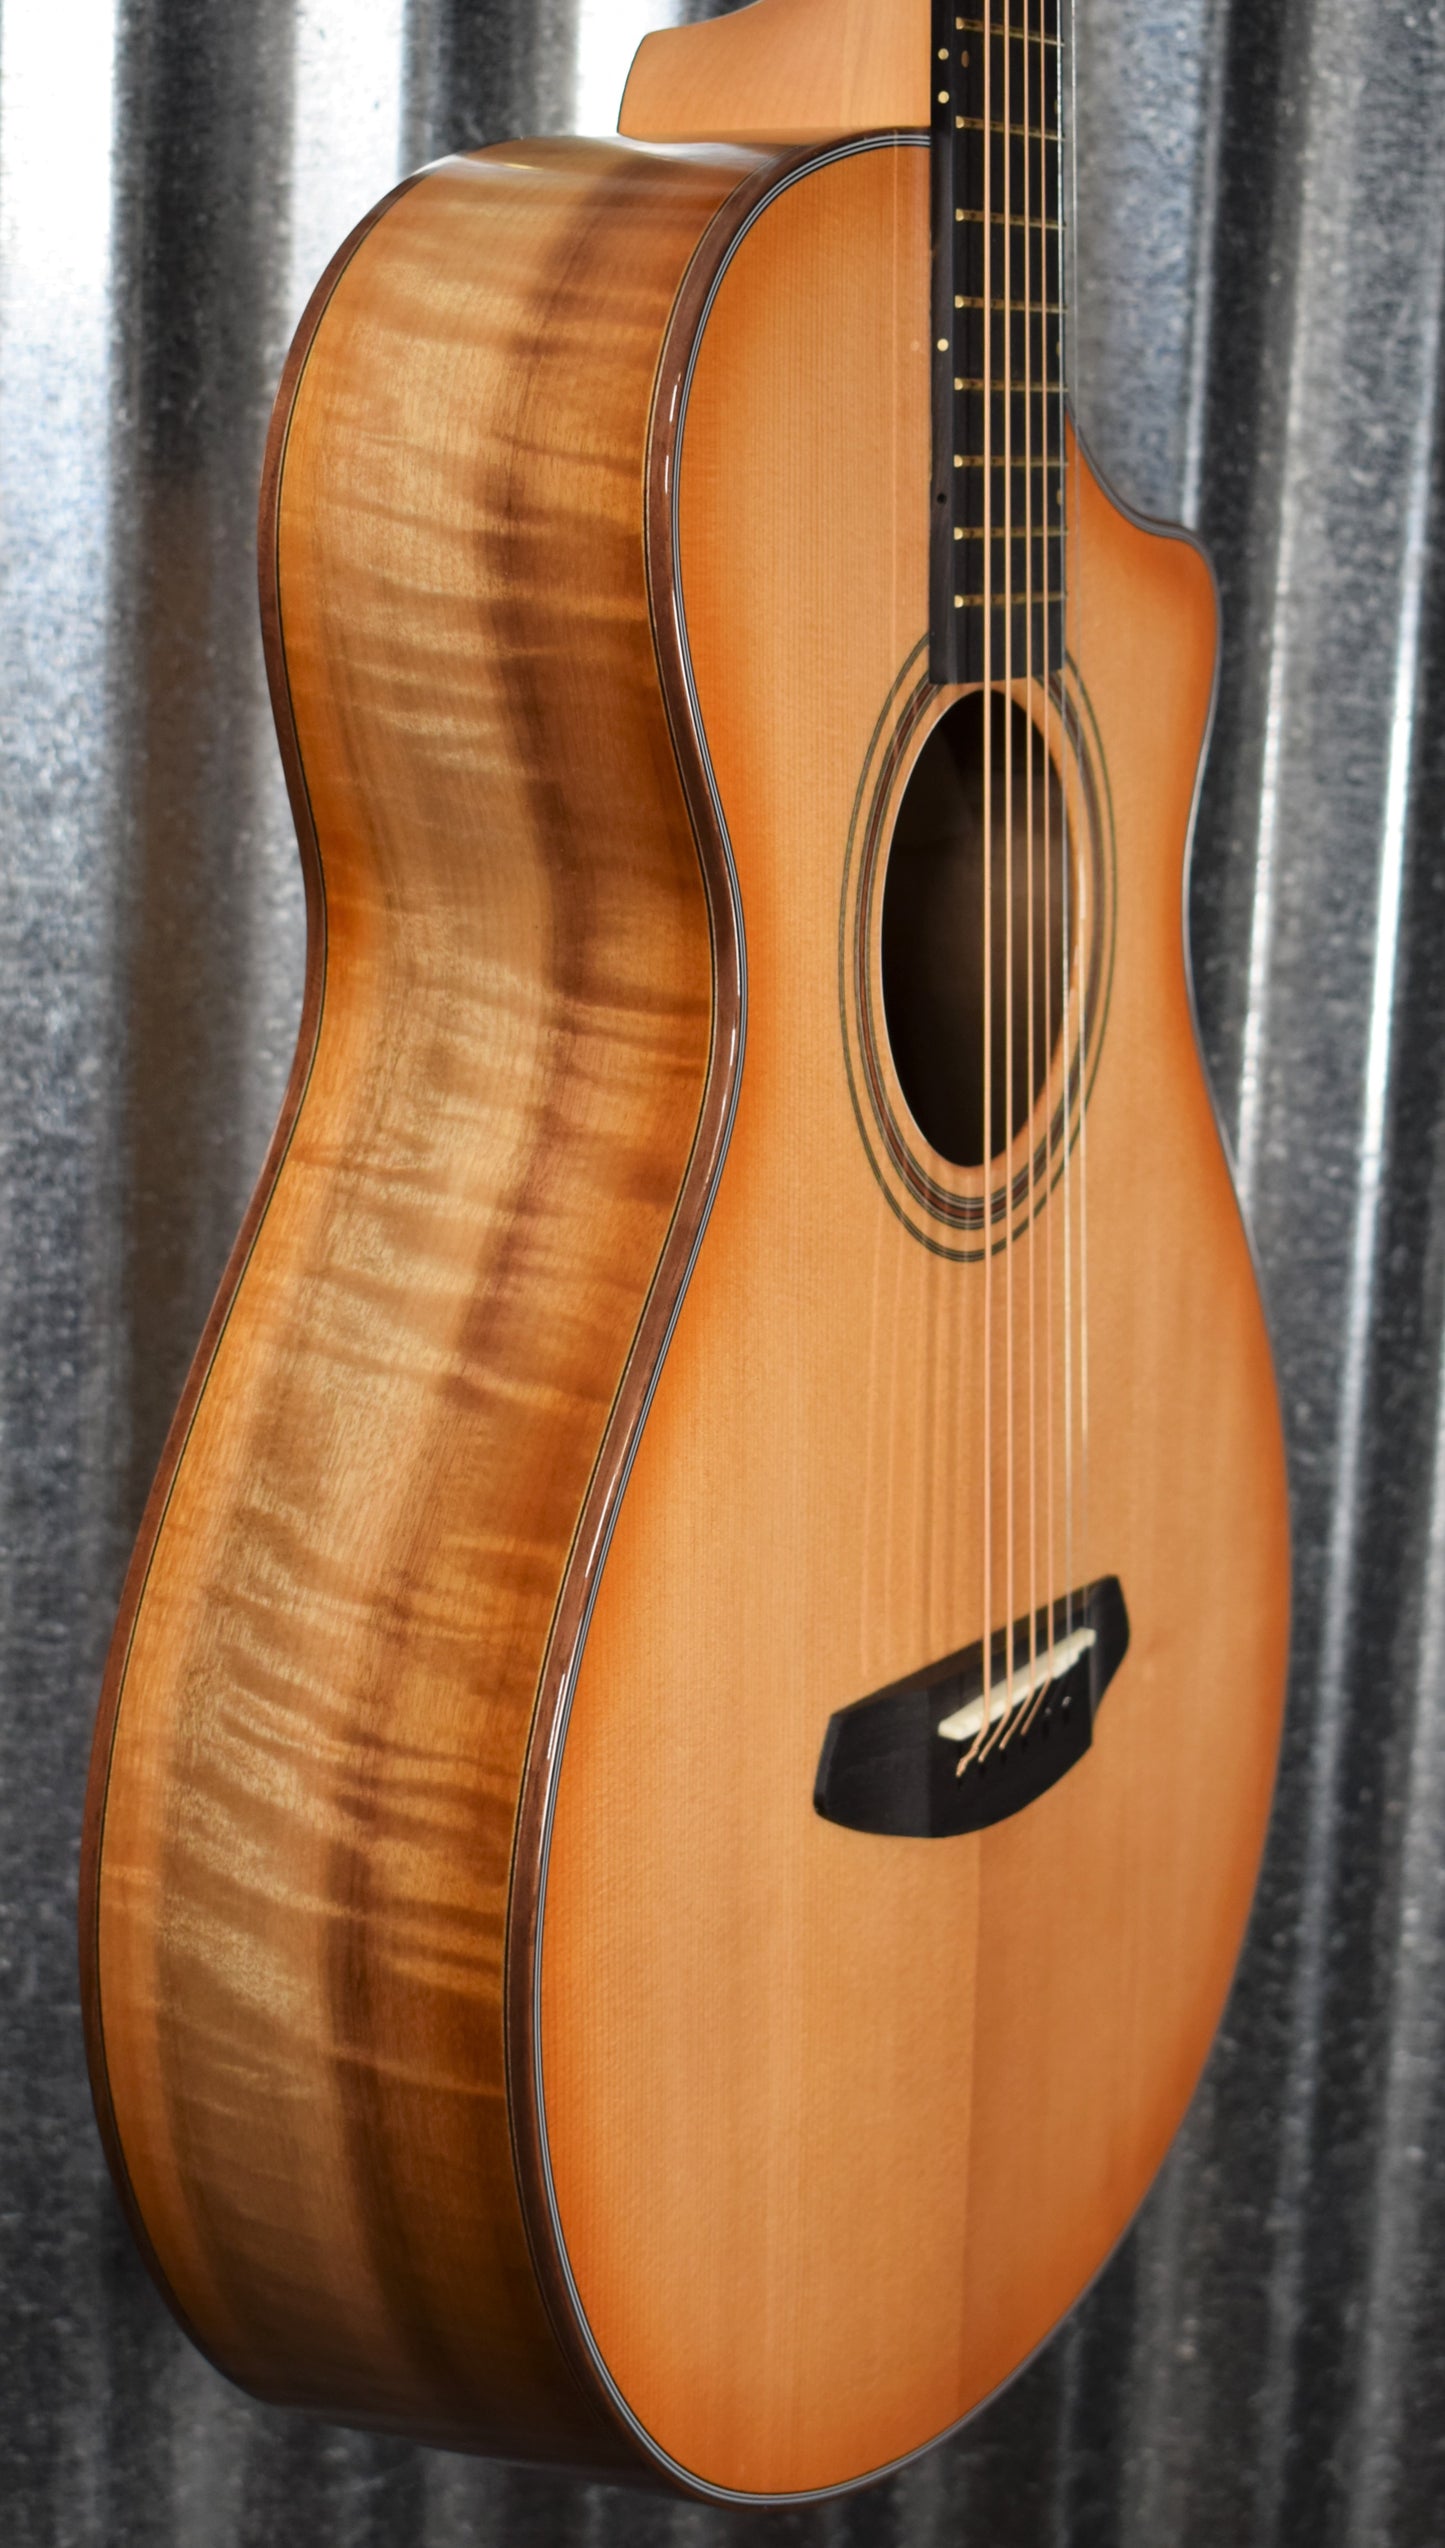 Breedlove Artista Concertina Natural Shadow CE Myrtlewood Acoustic Electric Guitar B Stock #2781